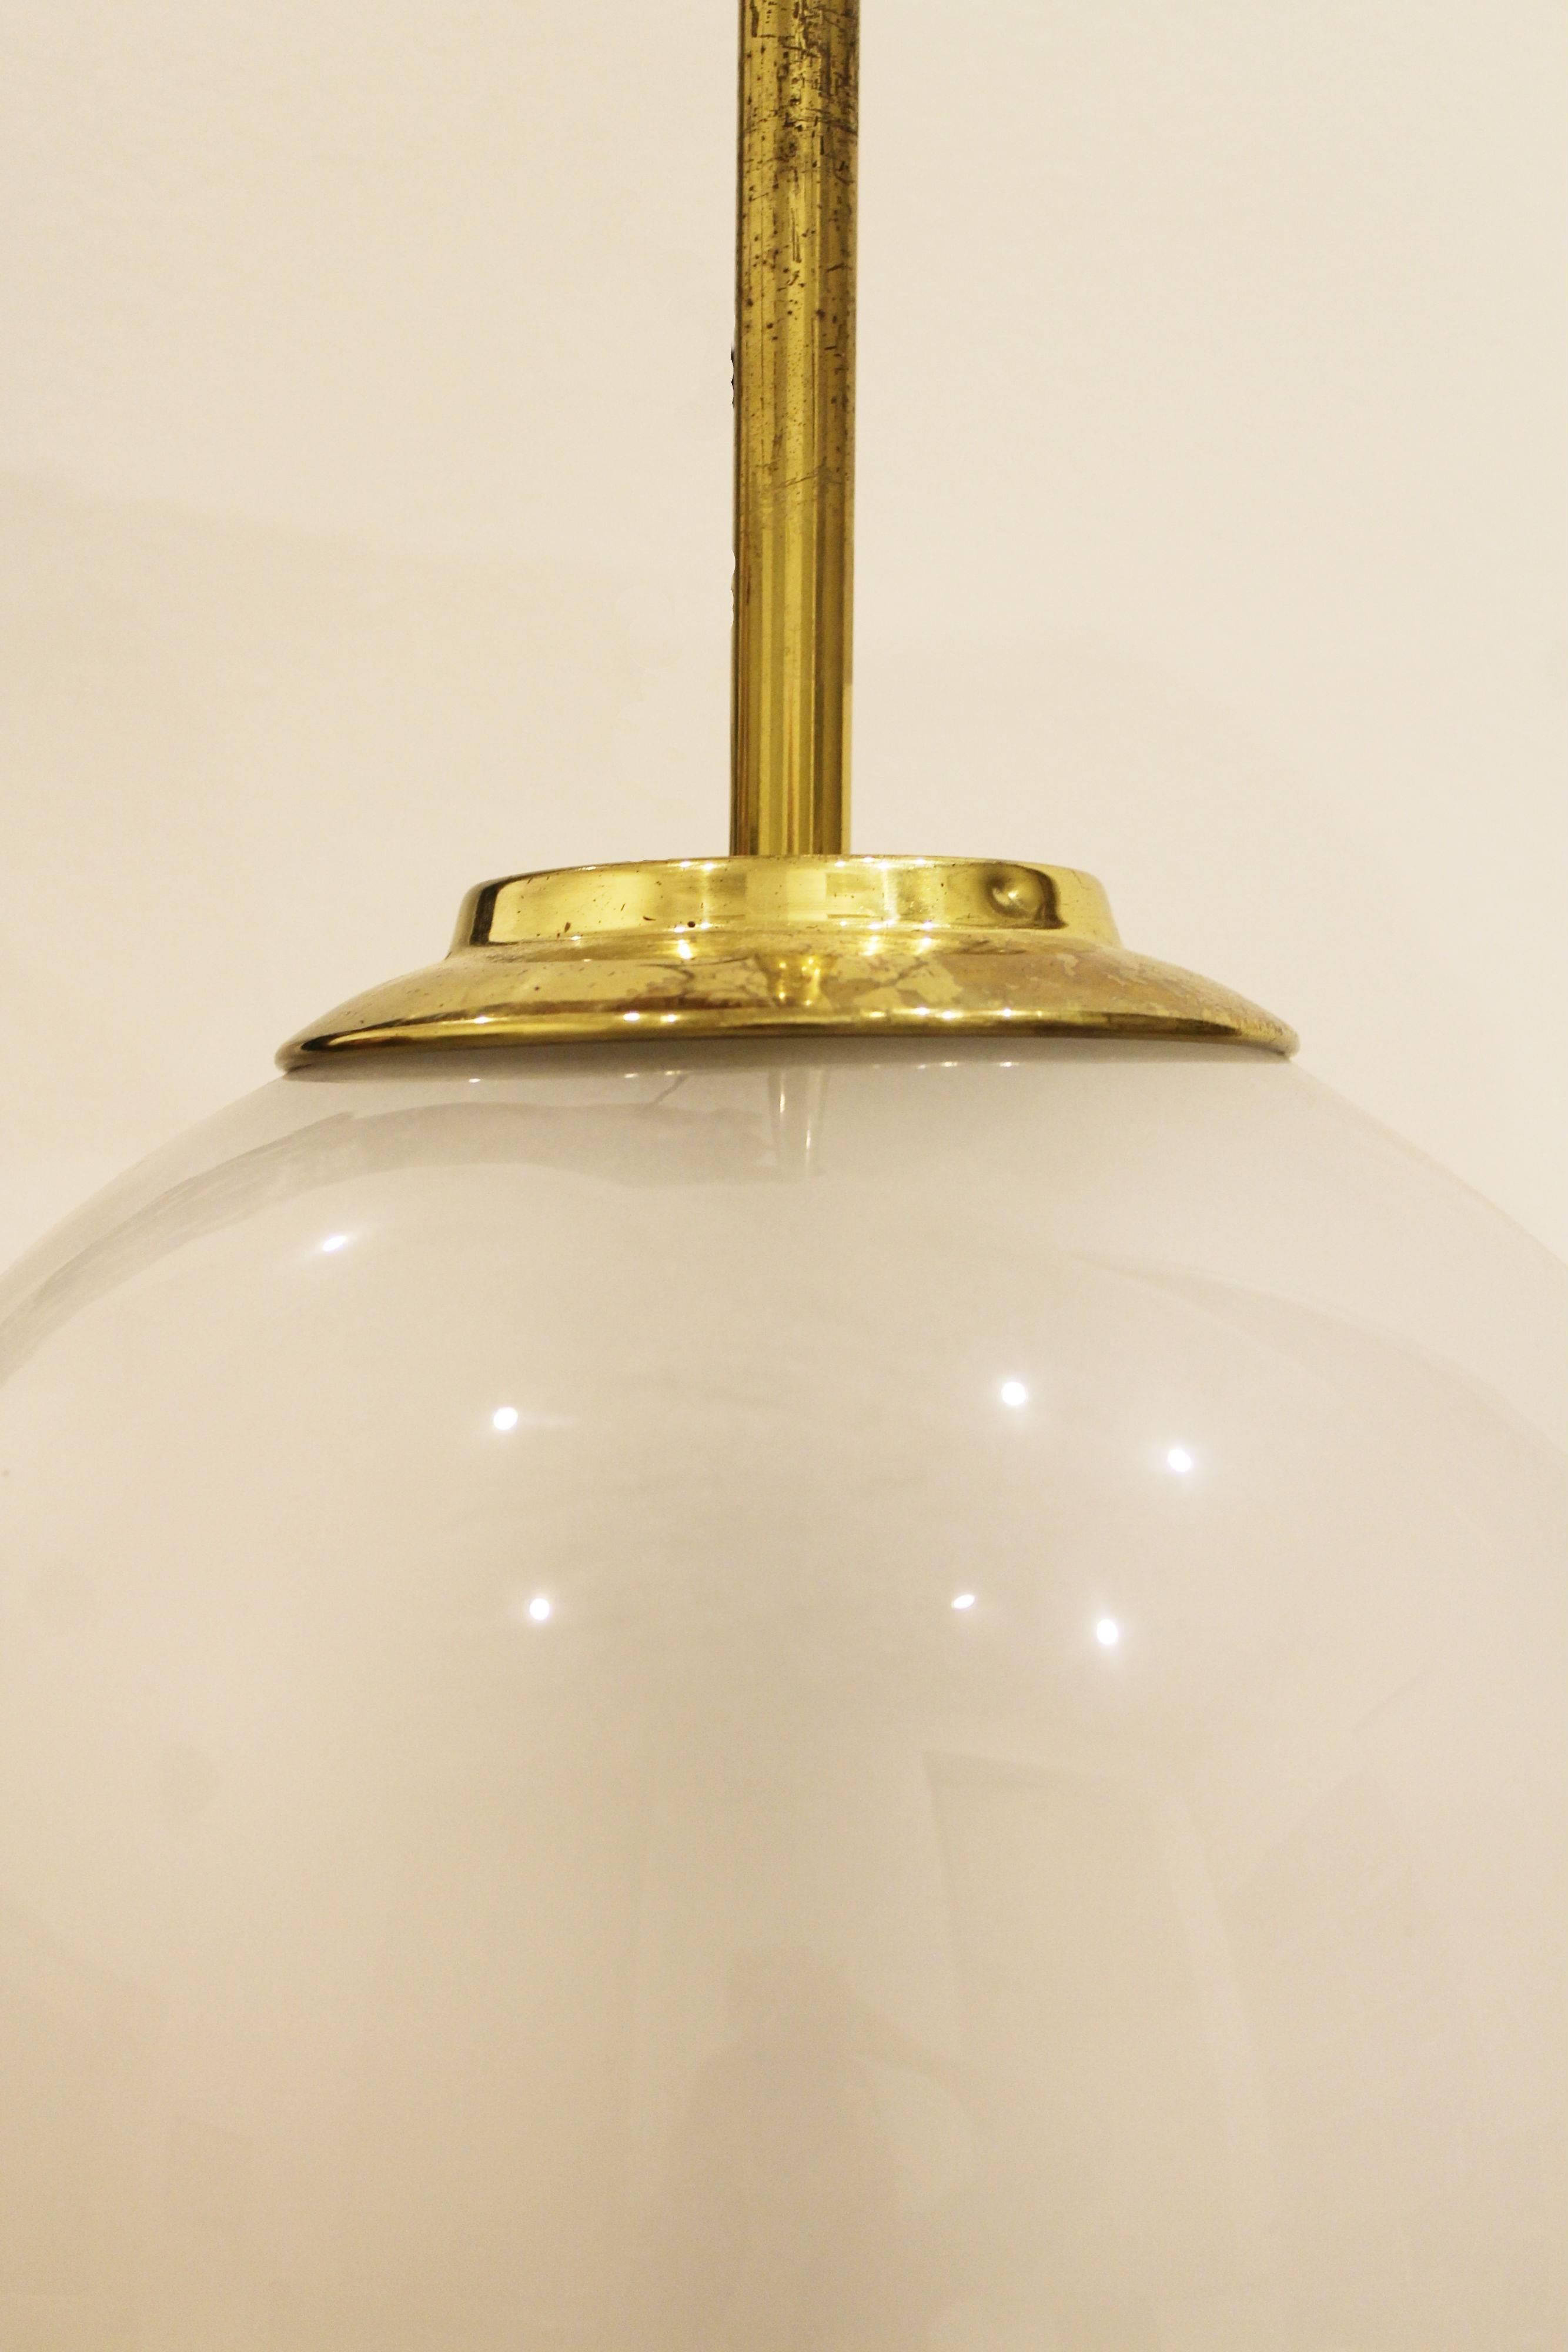 Pair of wall sconces called Lp11 'Pallone, designed in 1958, by Luigi Caccia Dominioni, Manufactured by Azucena, Milan.
Opaline glass globe on mobile gilt brass tube, fixated on rectangular wall plate (25 x 6 1/2 cm). 
External black cable.
  